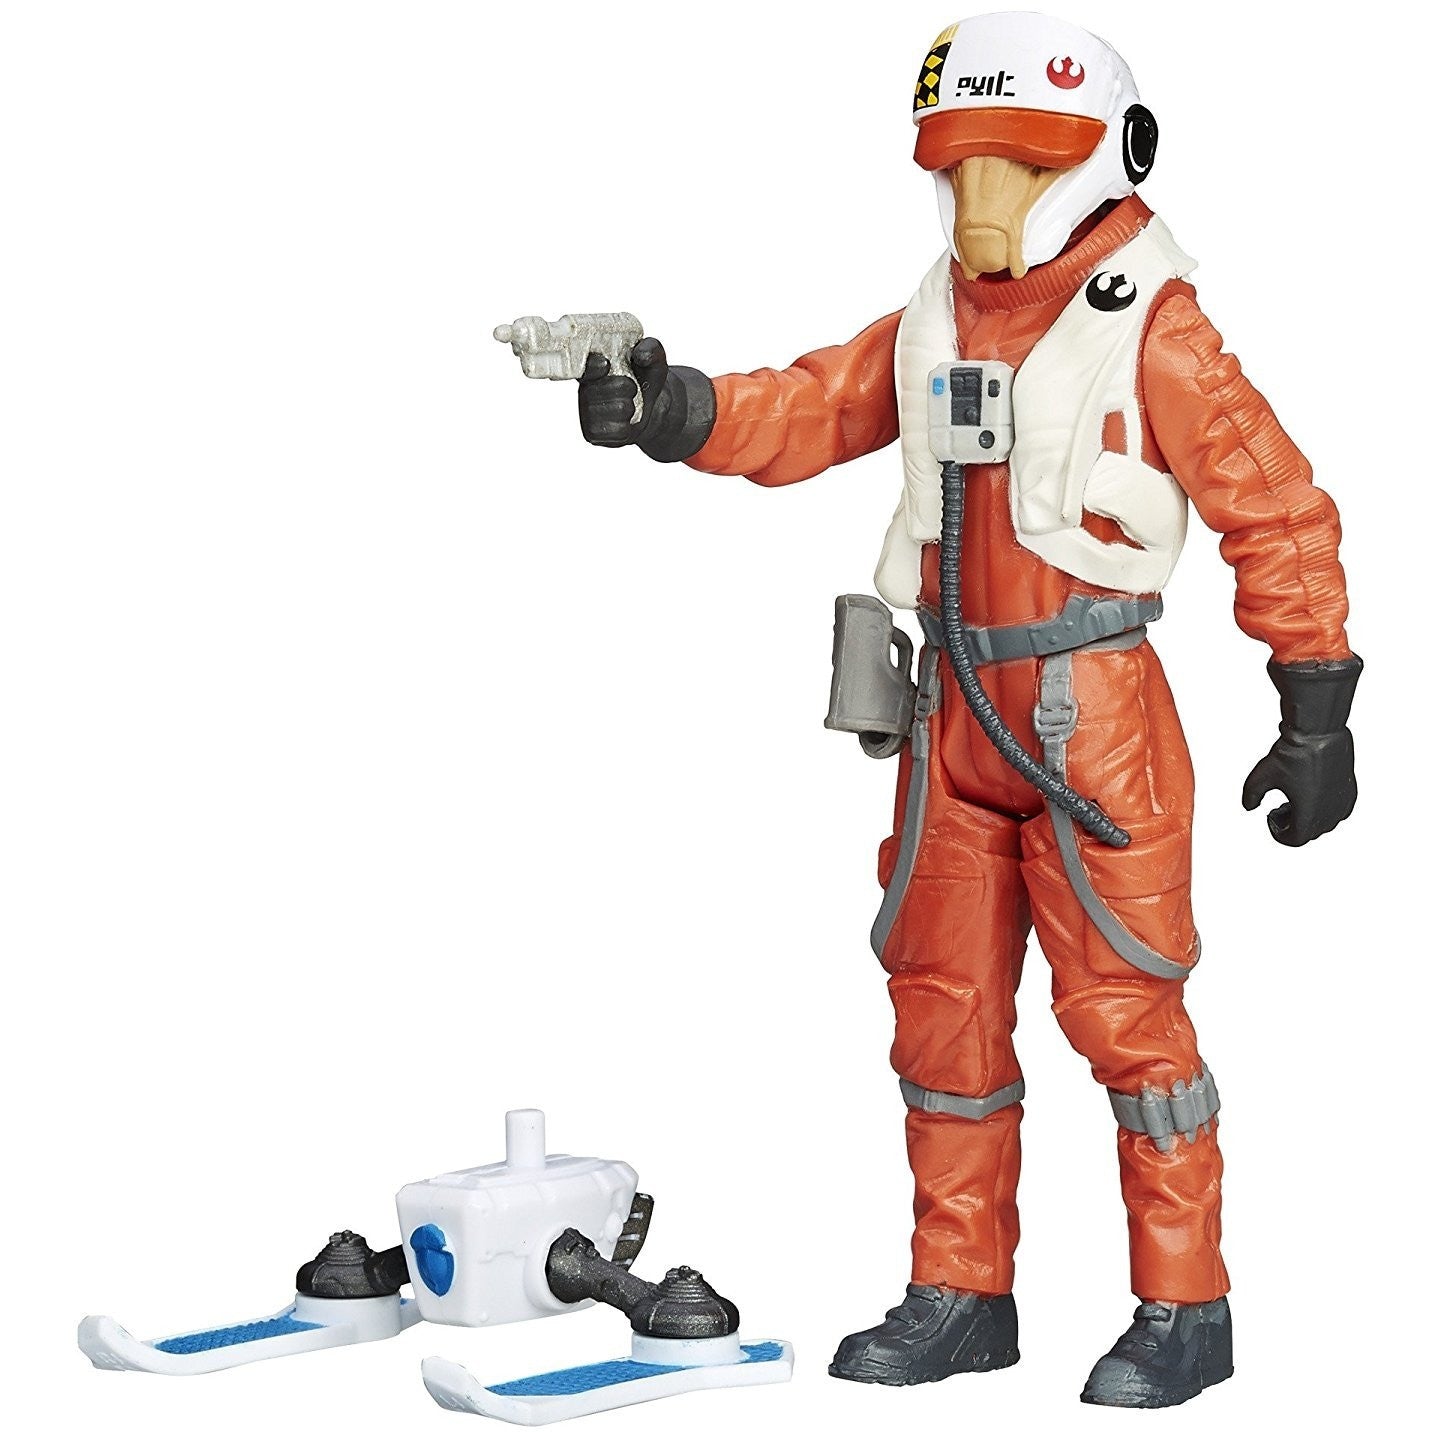 Star Wars X-Wing Pilot Asty Action Figure